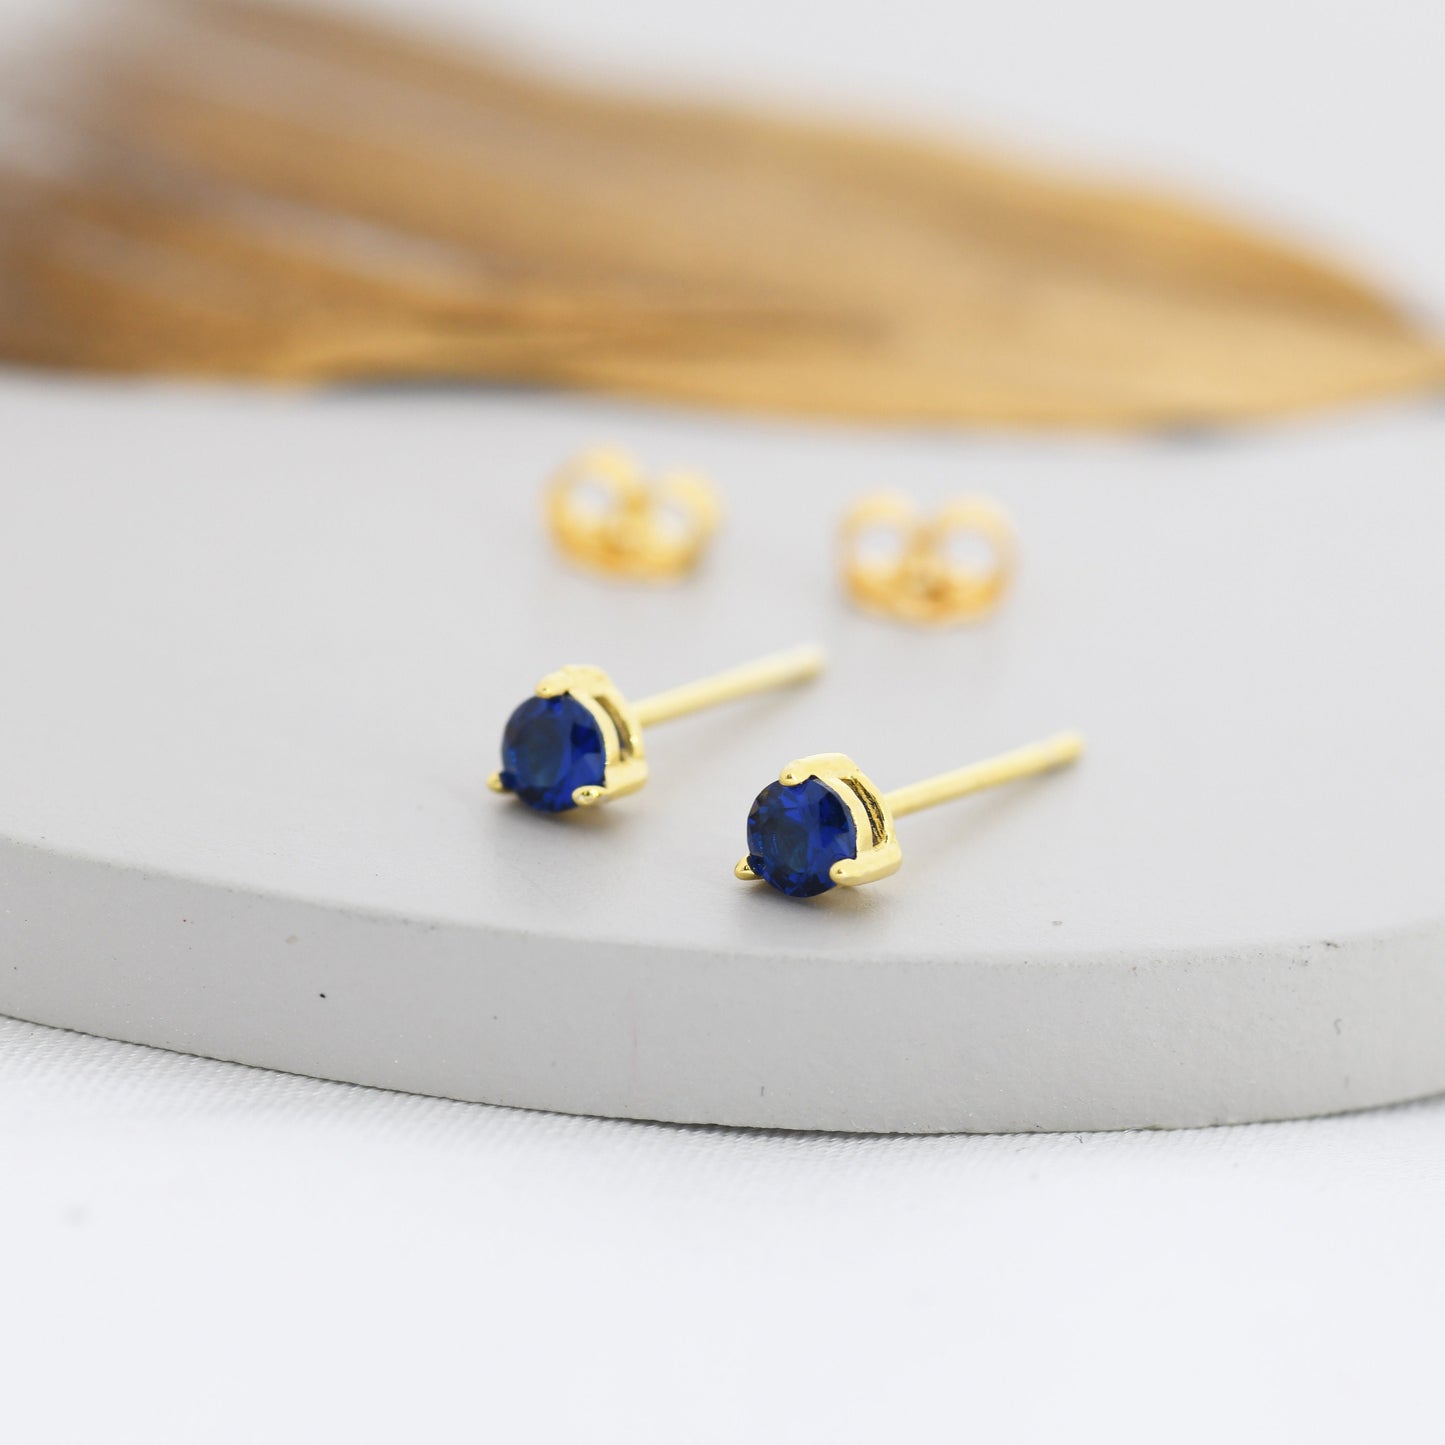 Extra Tiny Sapphire Blue Crystal CZ Stud Earrings in Sterling Silver, Three Prong 3mm Teeny Tiny Stud